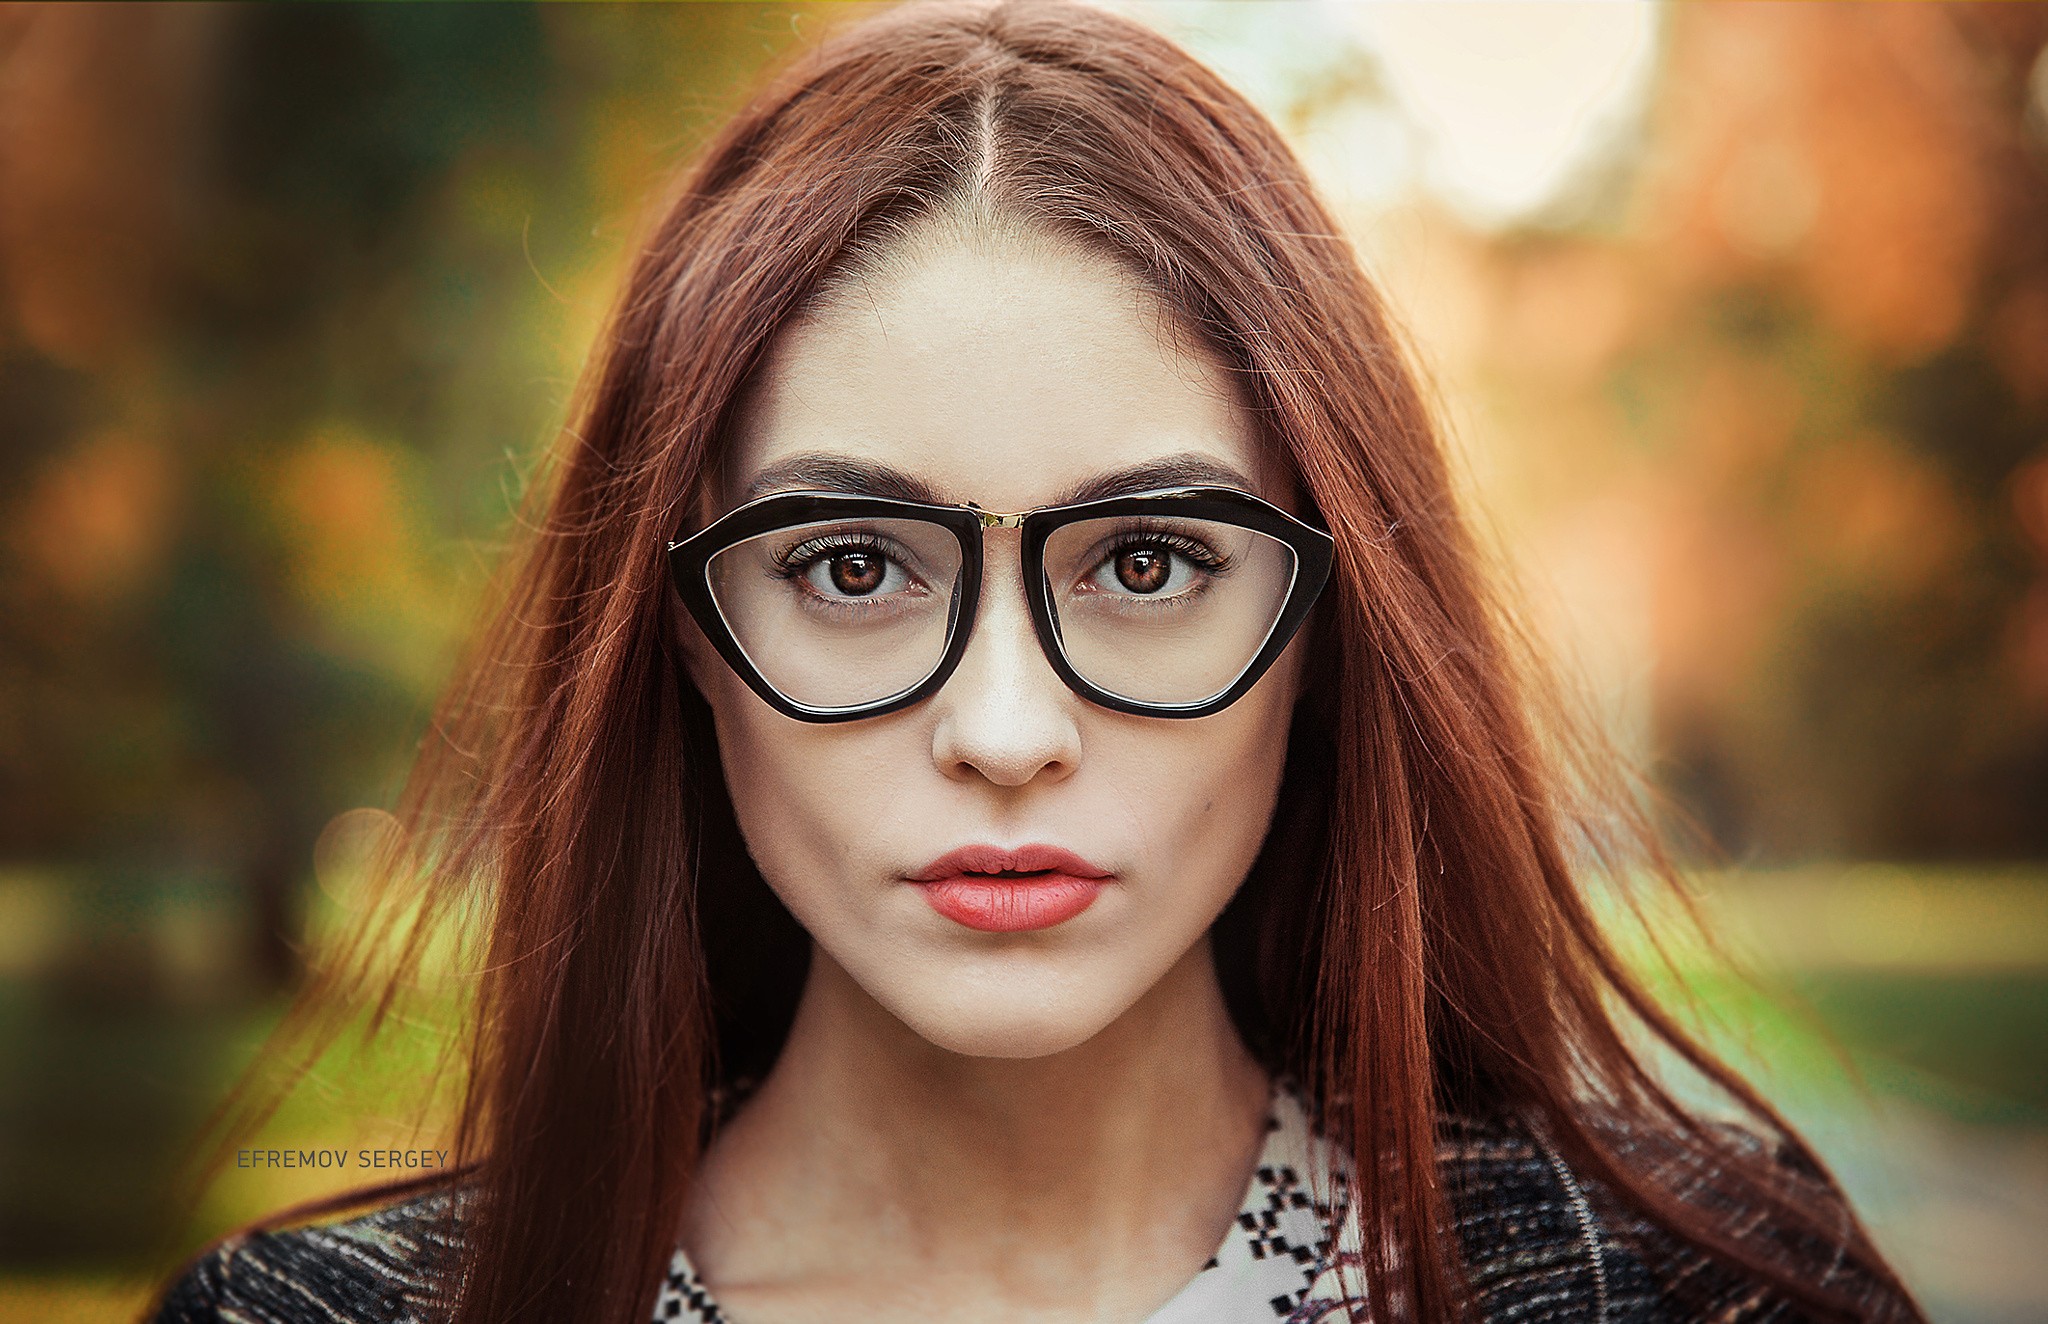 People 2048x1324 women face portrait glasses women with glasses depth of field Sergey Efremov closeup watermarked